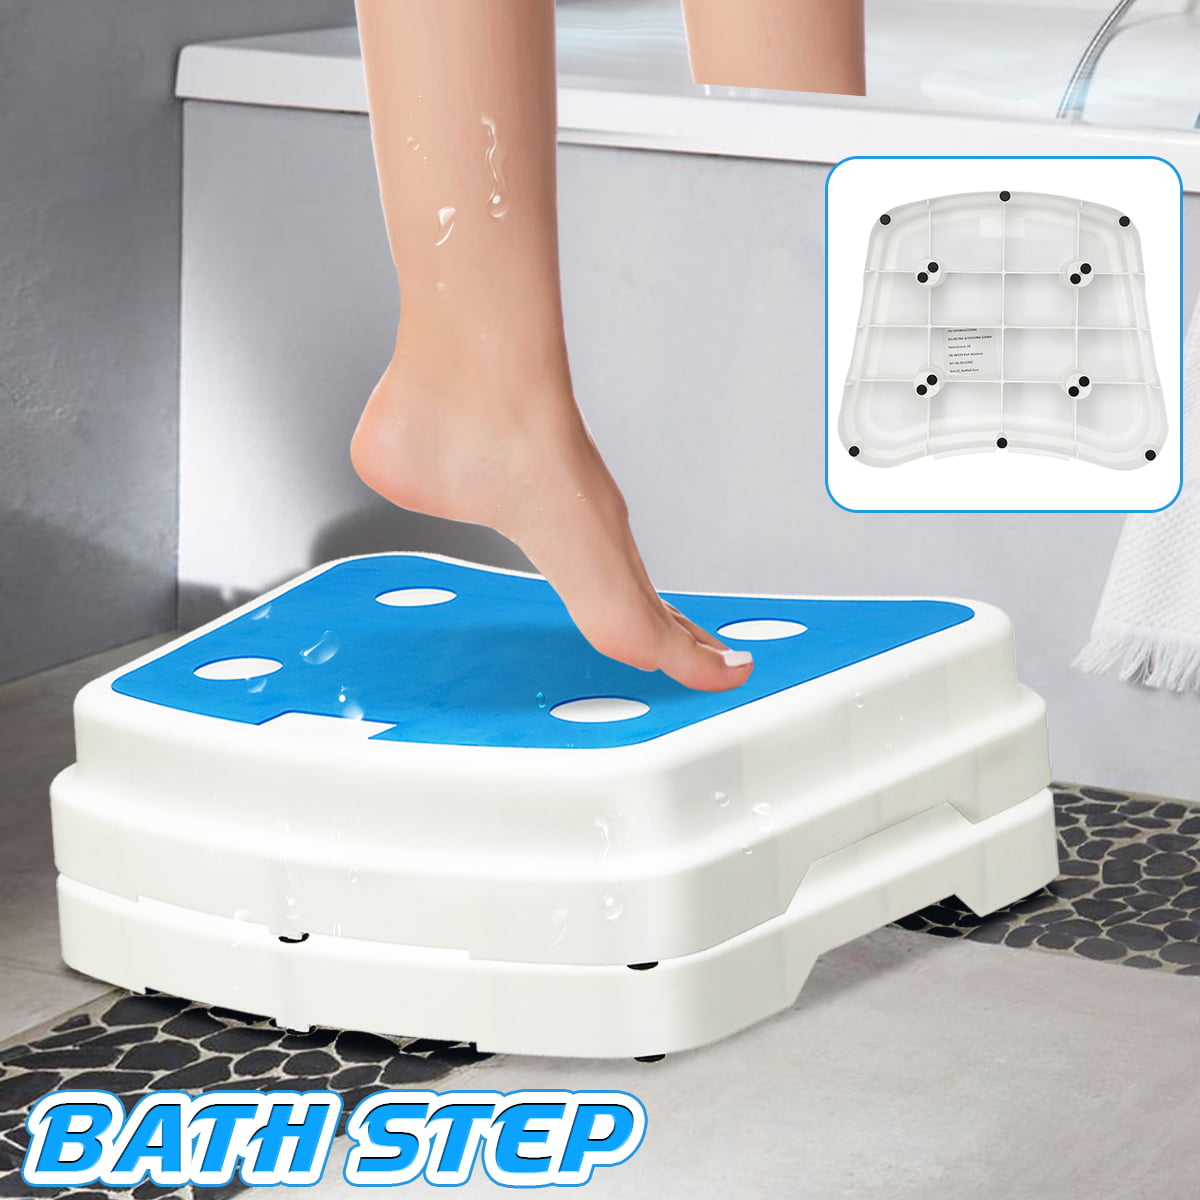 NEW SLIP RESISTANT STACK-ABLE SAFETY BATH STEP STOOL DISABILITY AID SHOWER STEP 